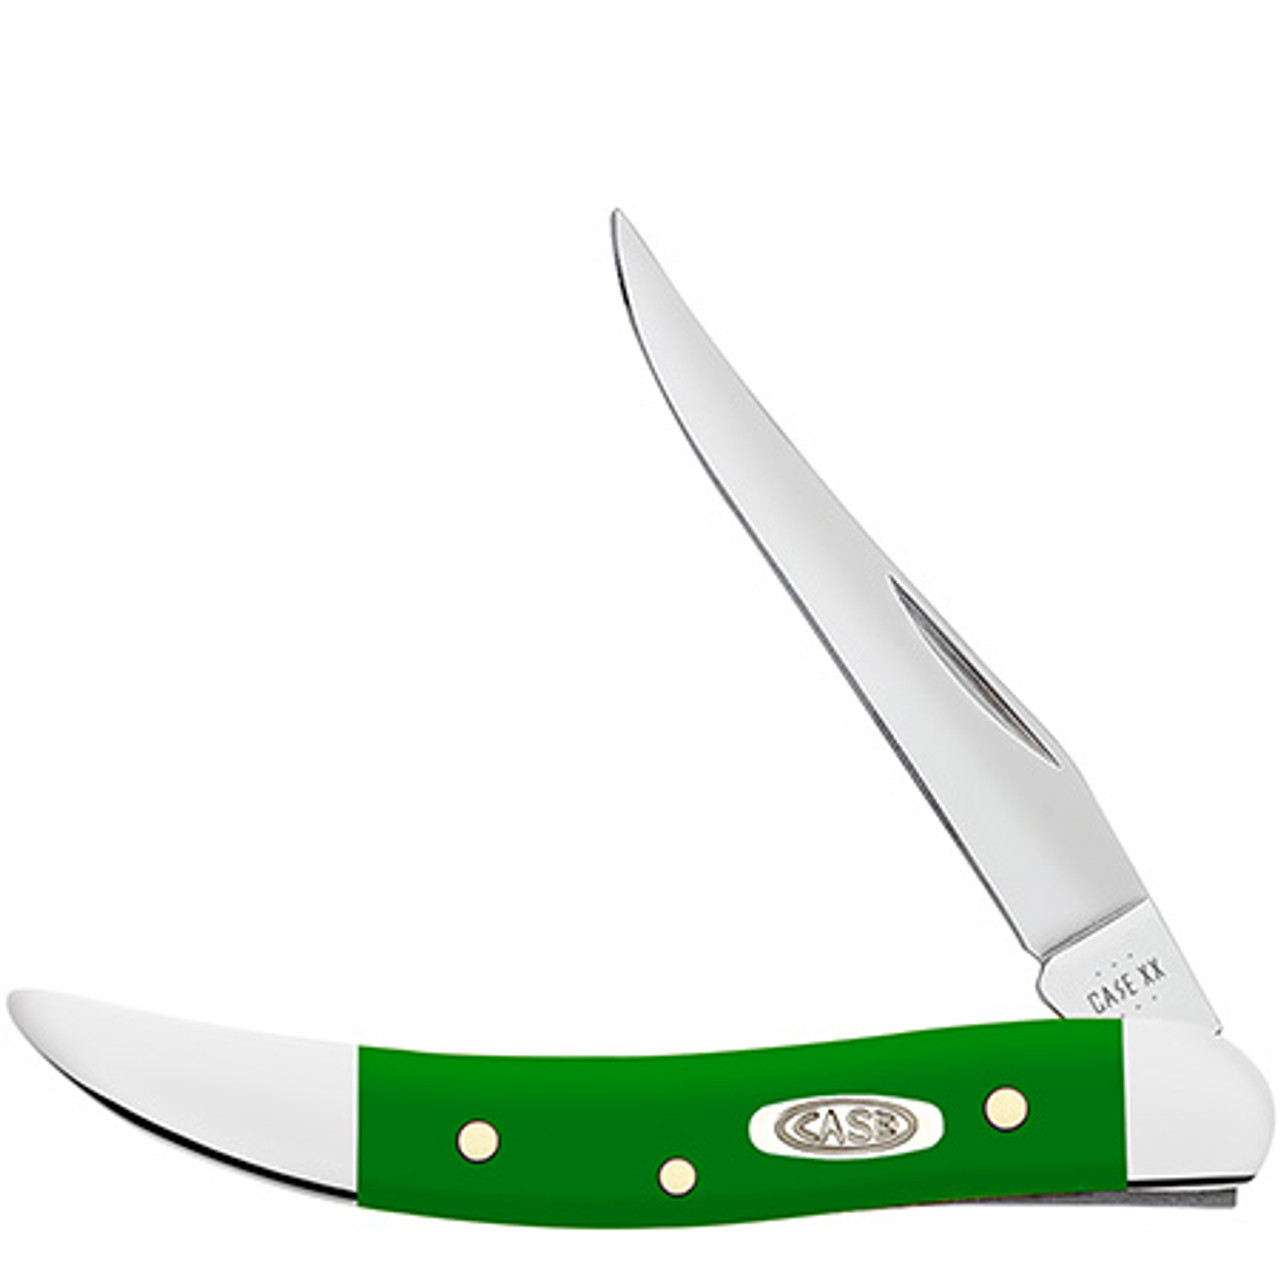 Case Small Texas Toothpick 53394 - Tru-Sharp Stainless Steel Long Clip Blade, Smooth Green Synthetic Handle (410096 SS)